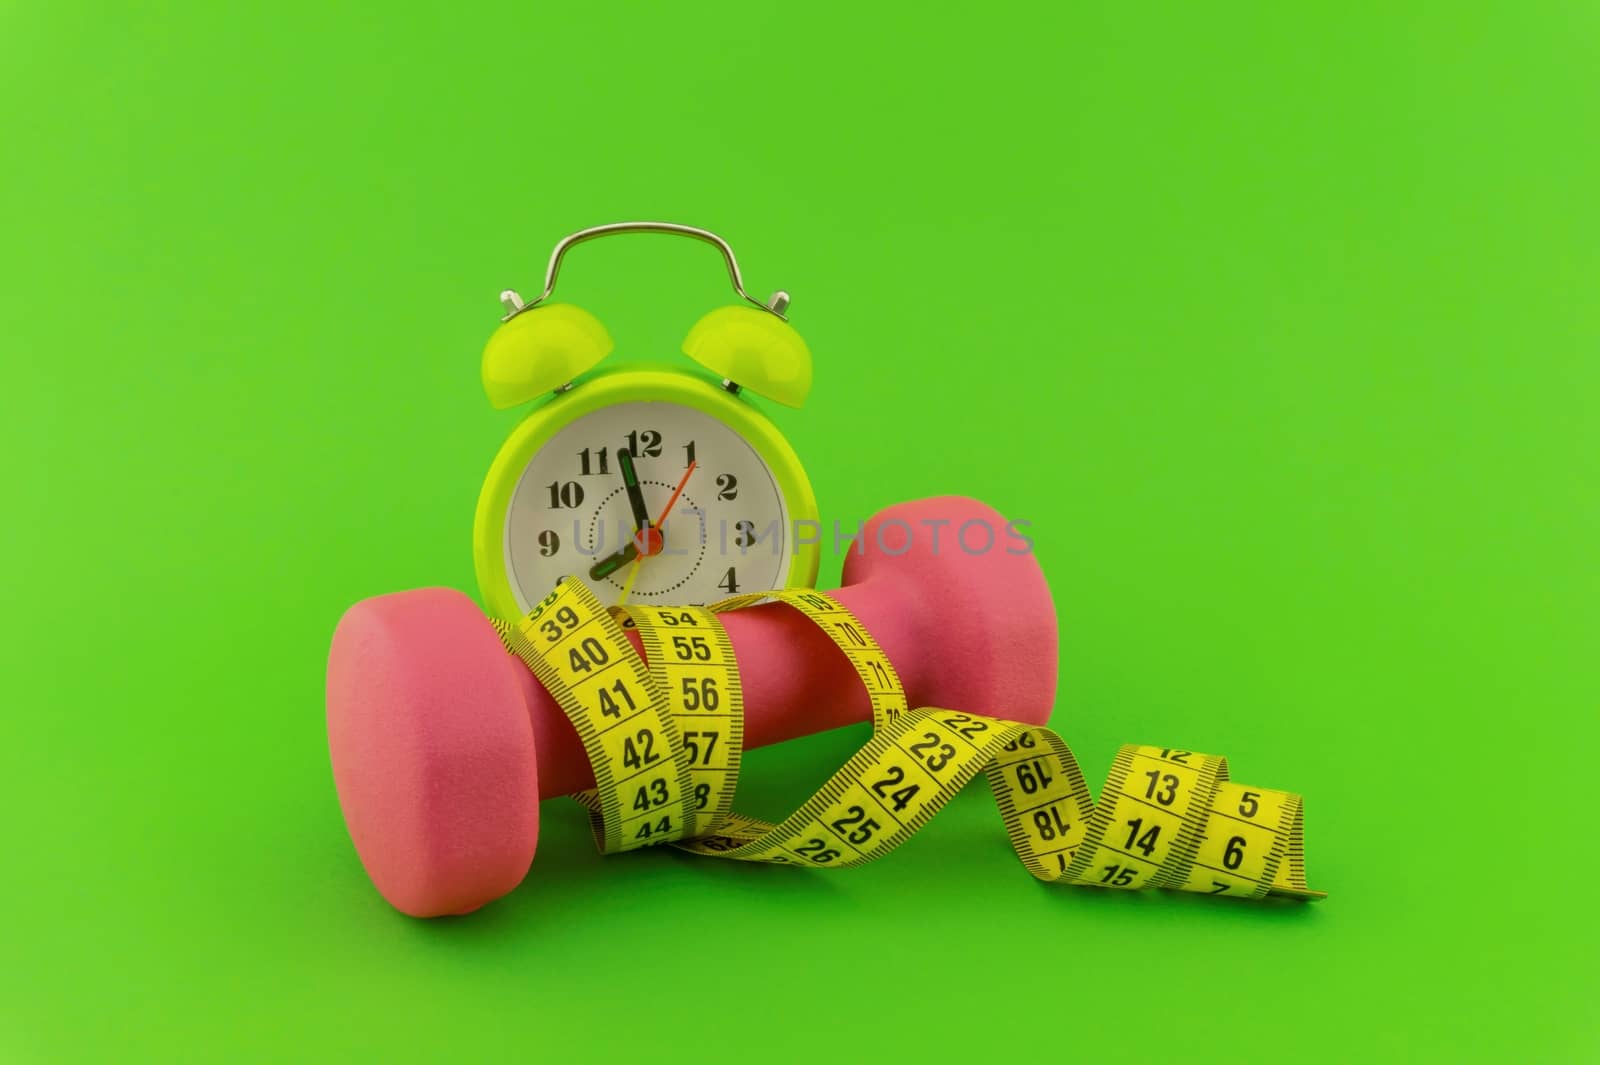 Starting healthy lifestyle concept. Still life with pink dumbbell, measuring tape and alarm clock on green background